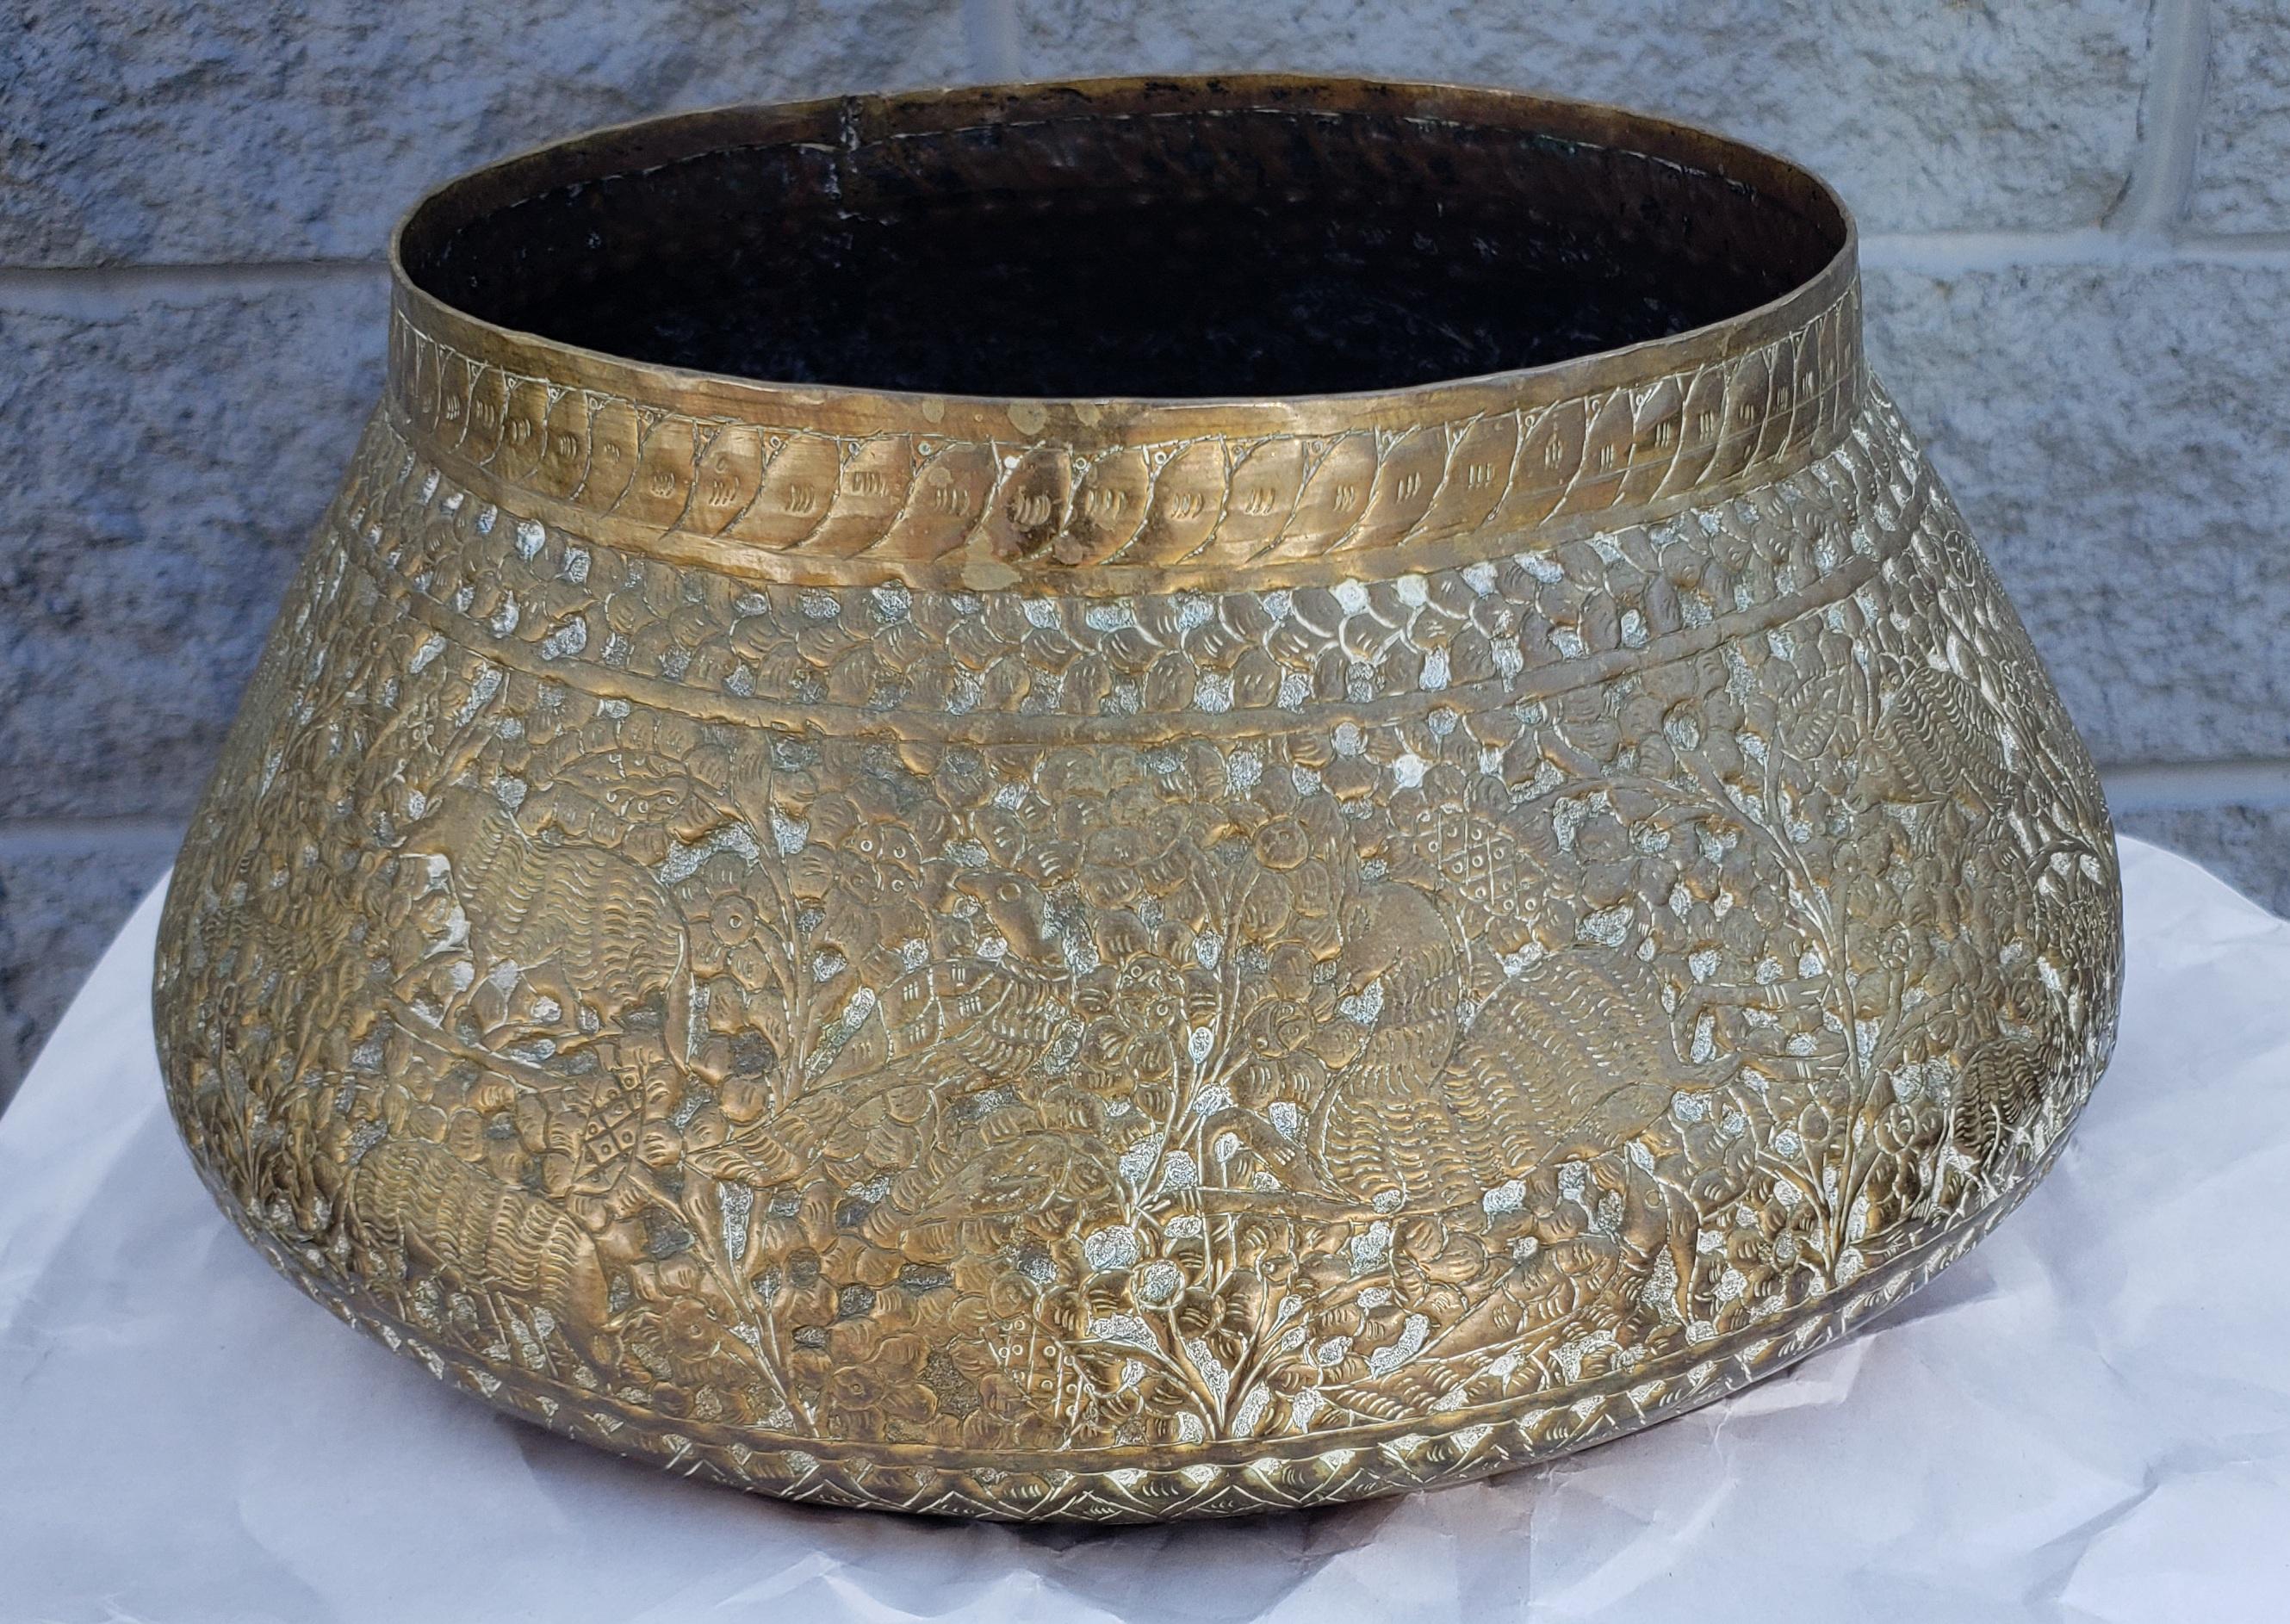 20th Century Indian Repoussé & Engraved Brass Bowl / Planter on Engraved Brass Stand / Stool For Sale